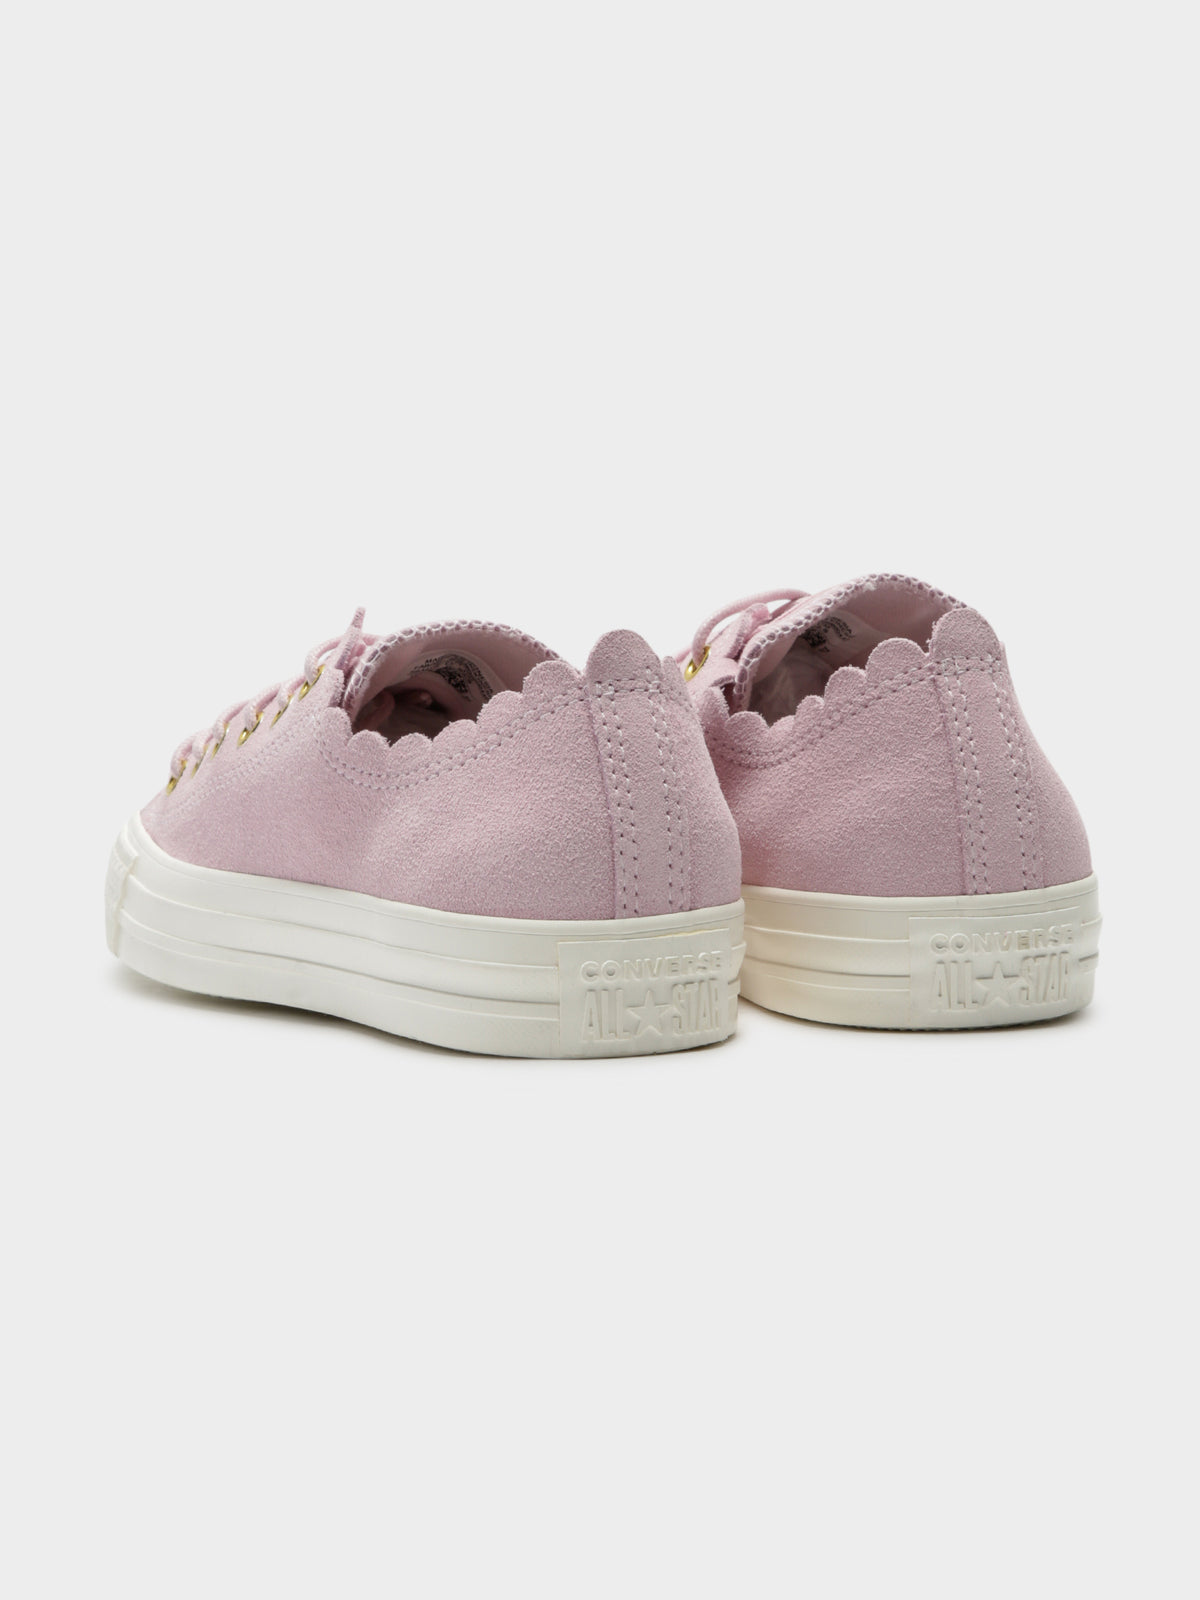 Womens Chuck Taylor All Stars Frilly Thrills in Pink Foam